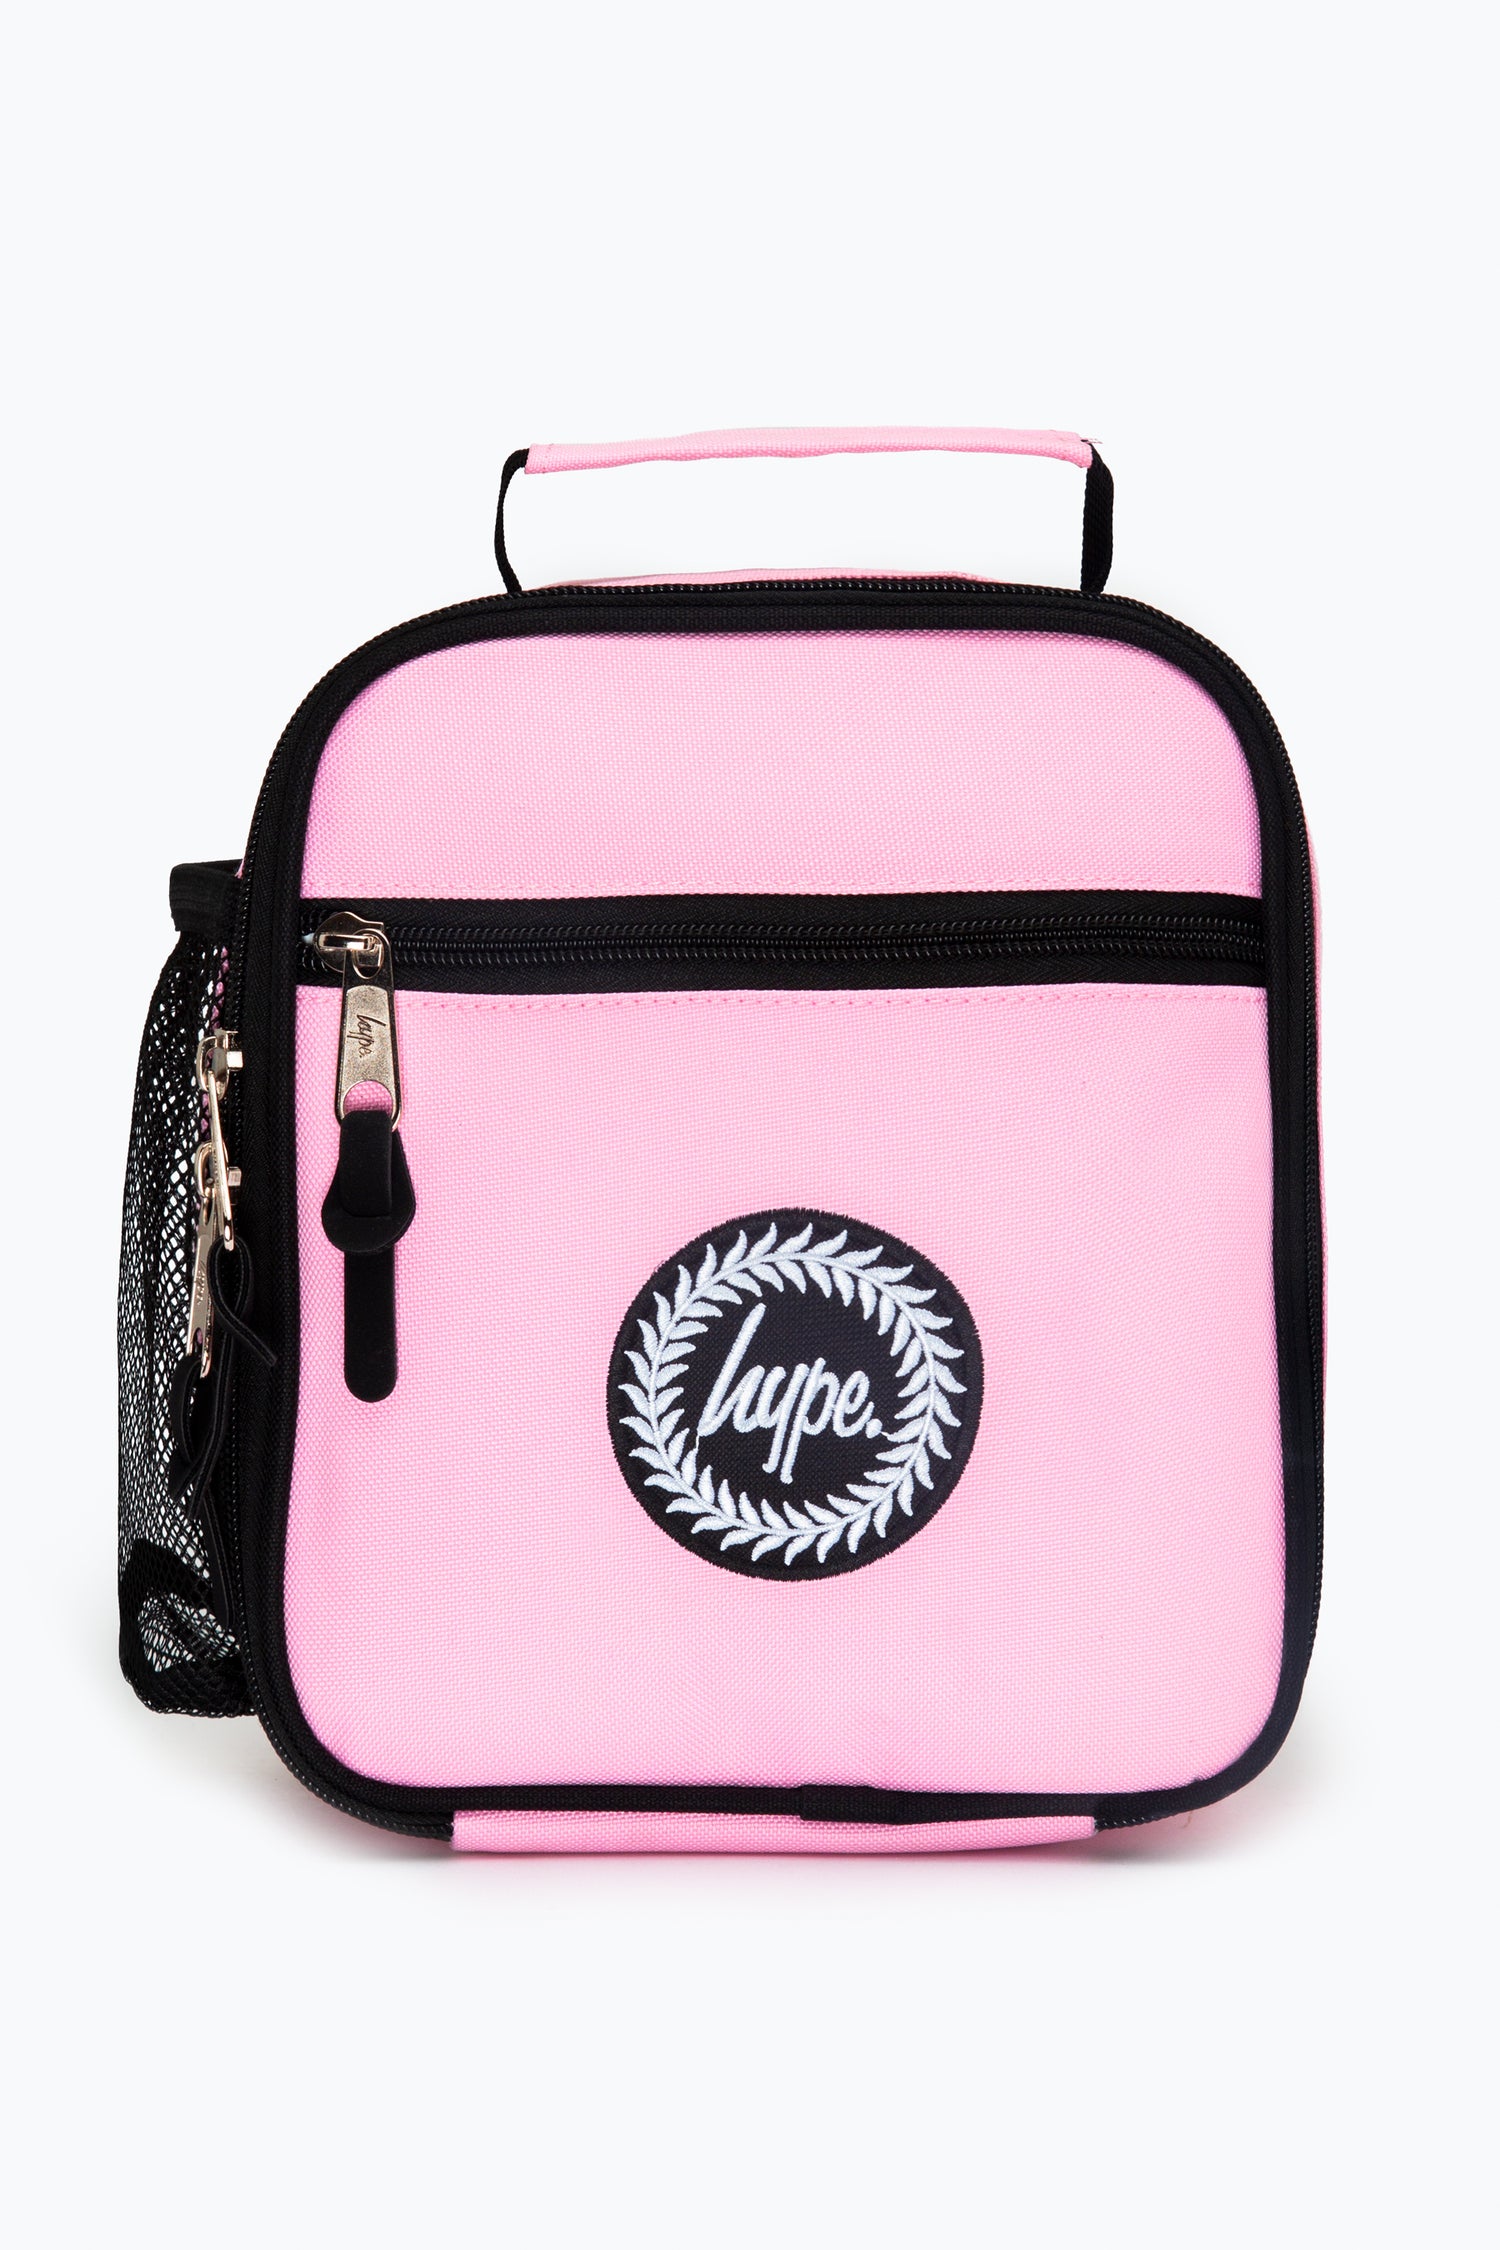 HYPE PINK LUNCHBOX